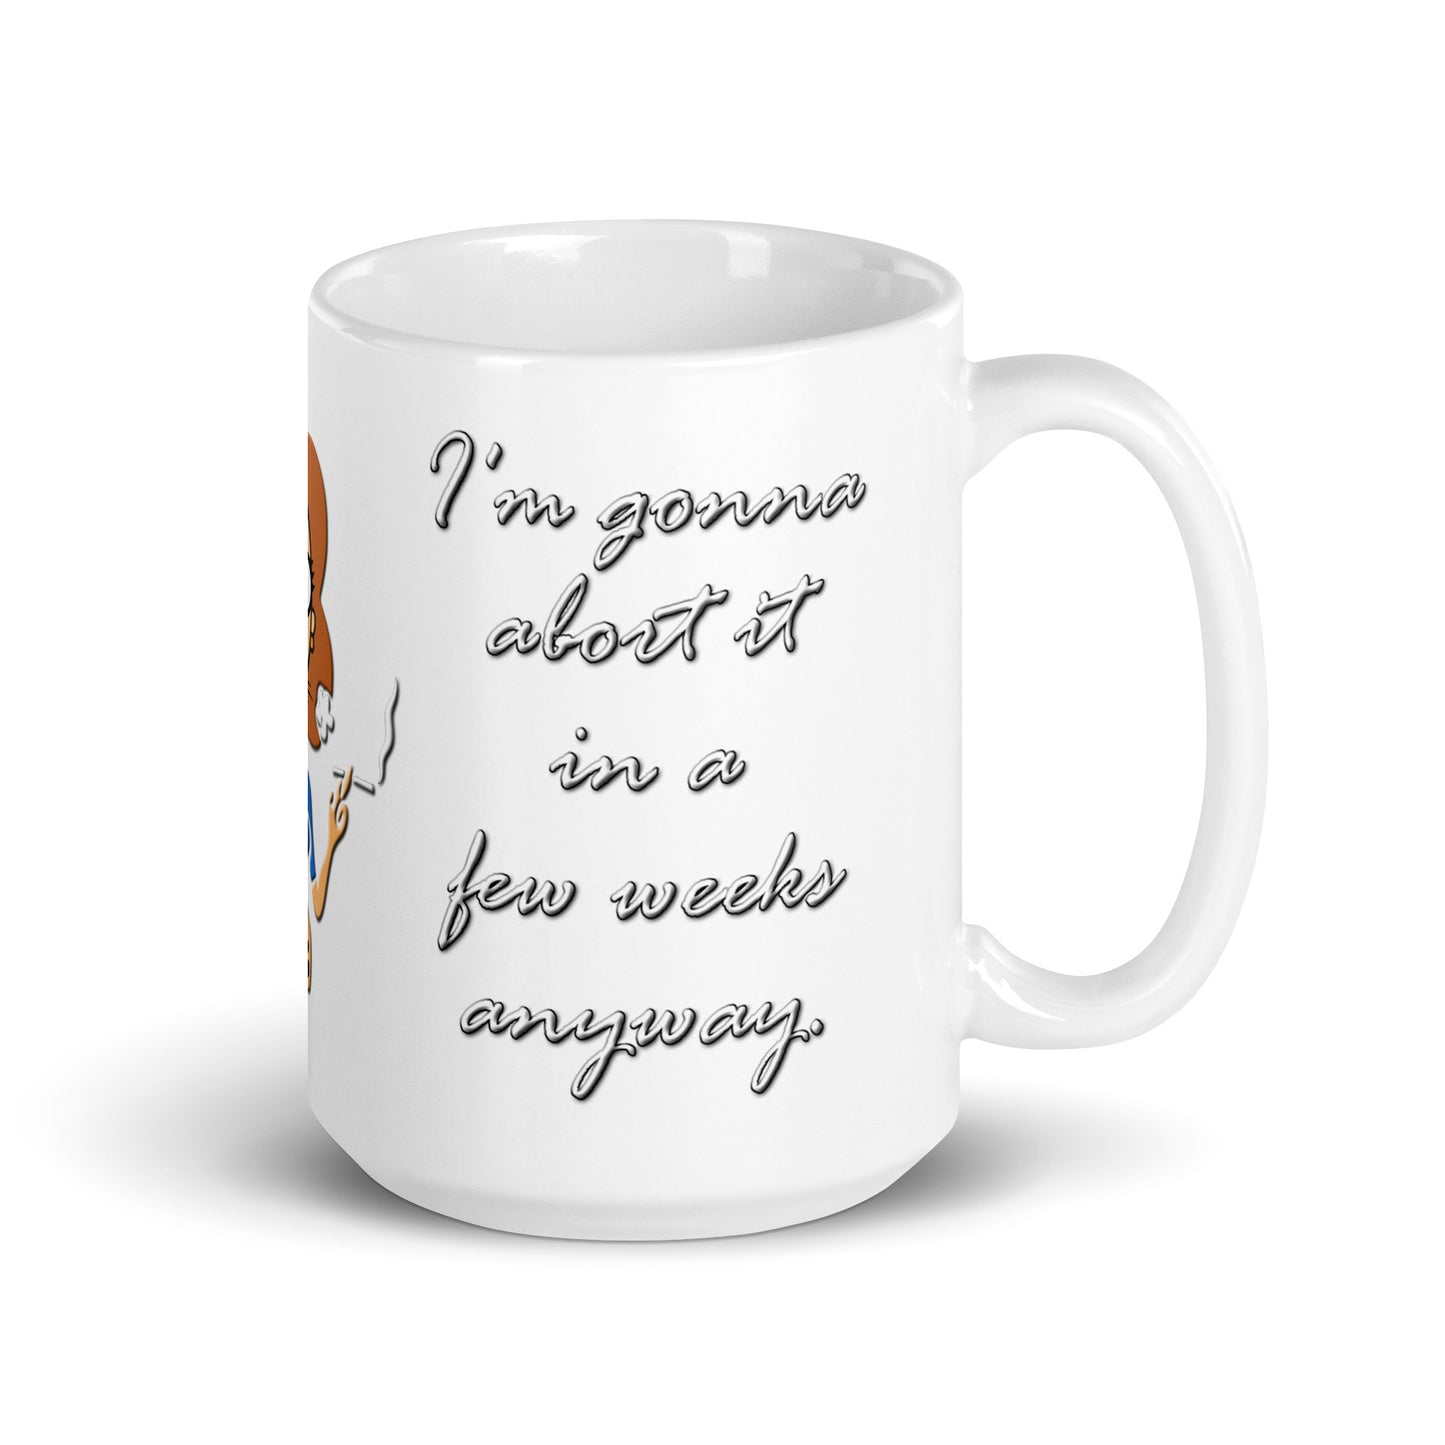 A015 Mug - White Glossy Ceramic Mug Featuring a Graphic of a Young Pregnant Woman Smoking, with the Text “What’s the Fuss? I’m Just Gonna Abort It in a Few Weeks Anyway.”